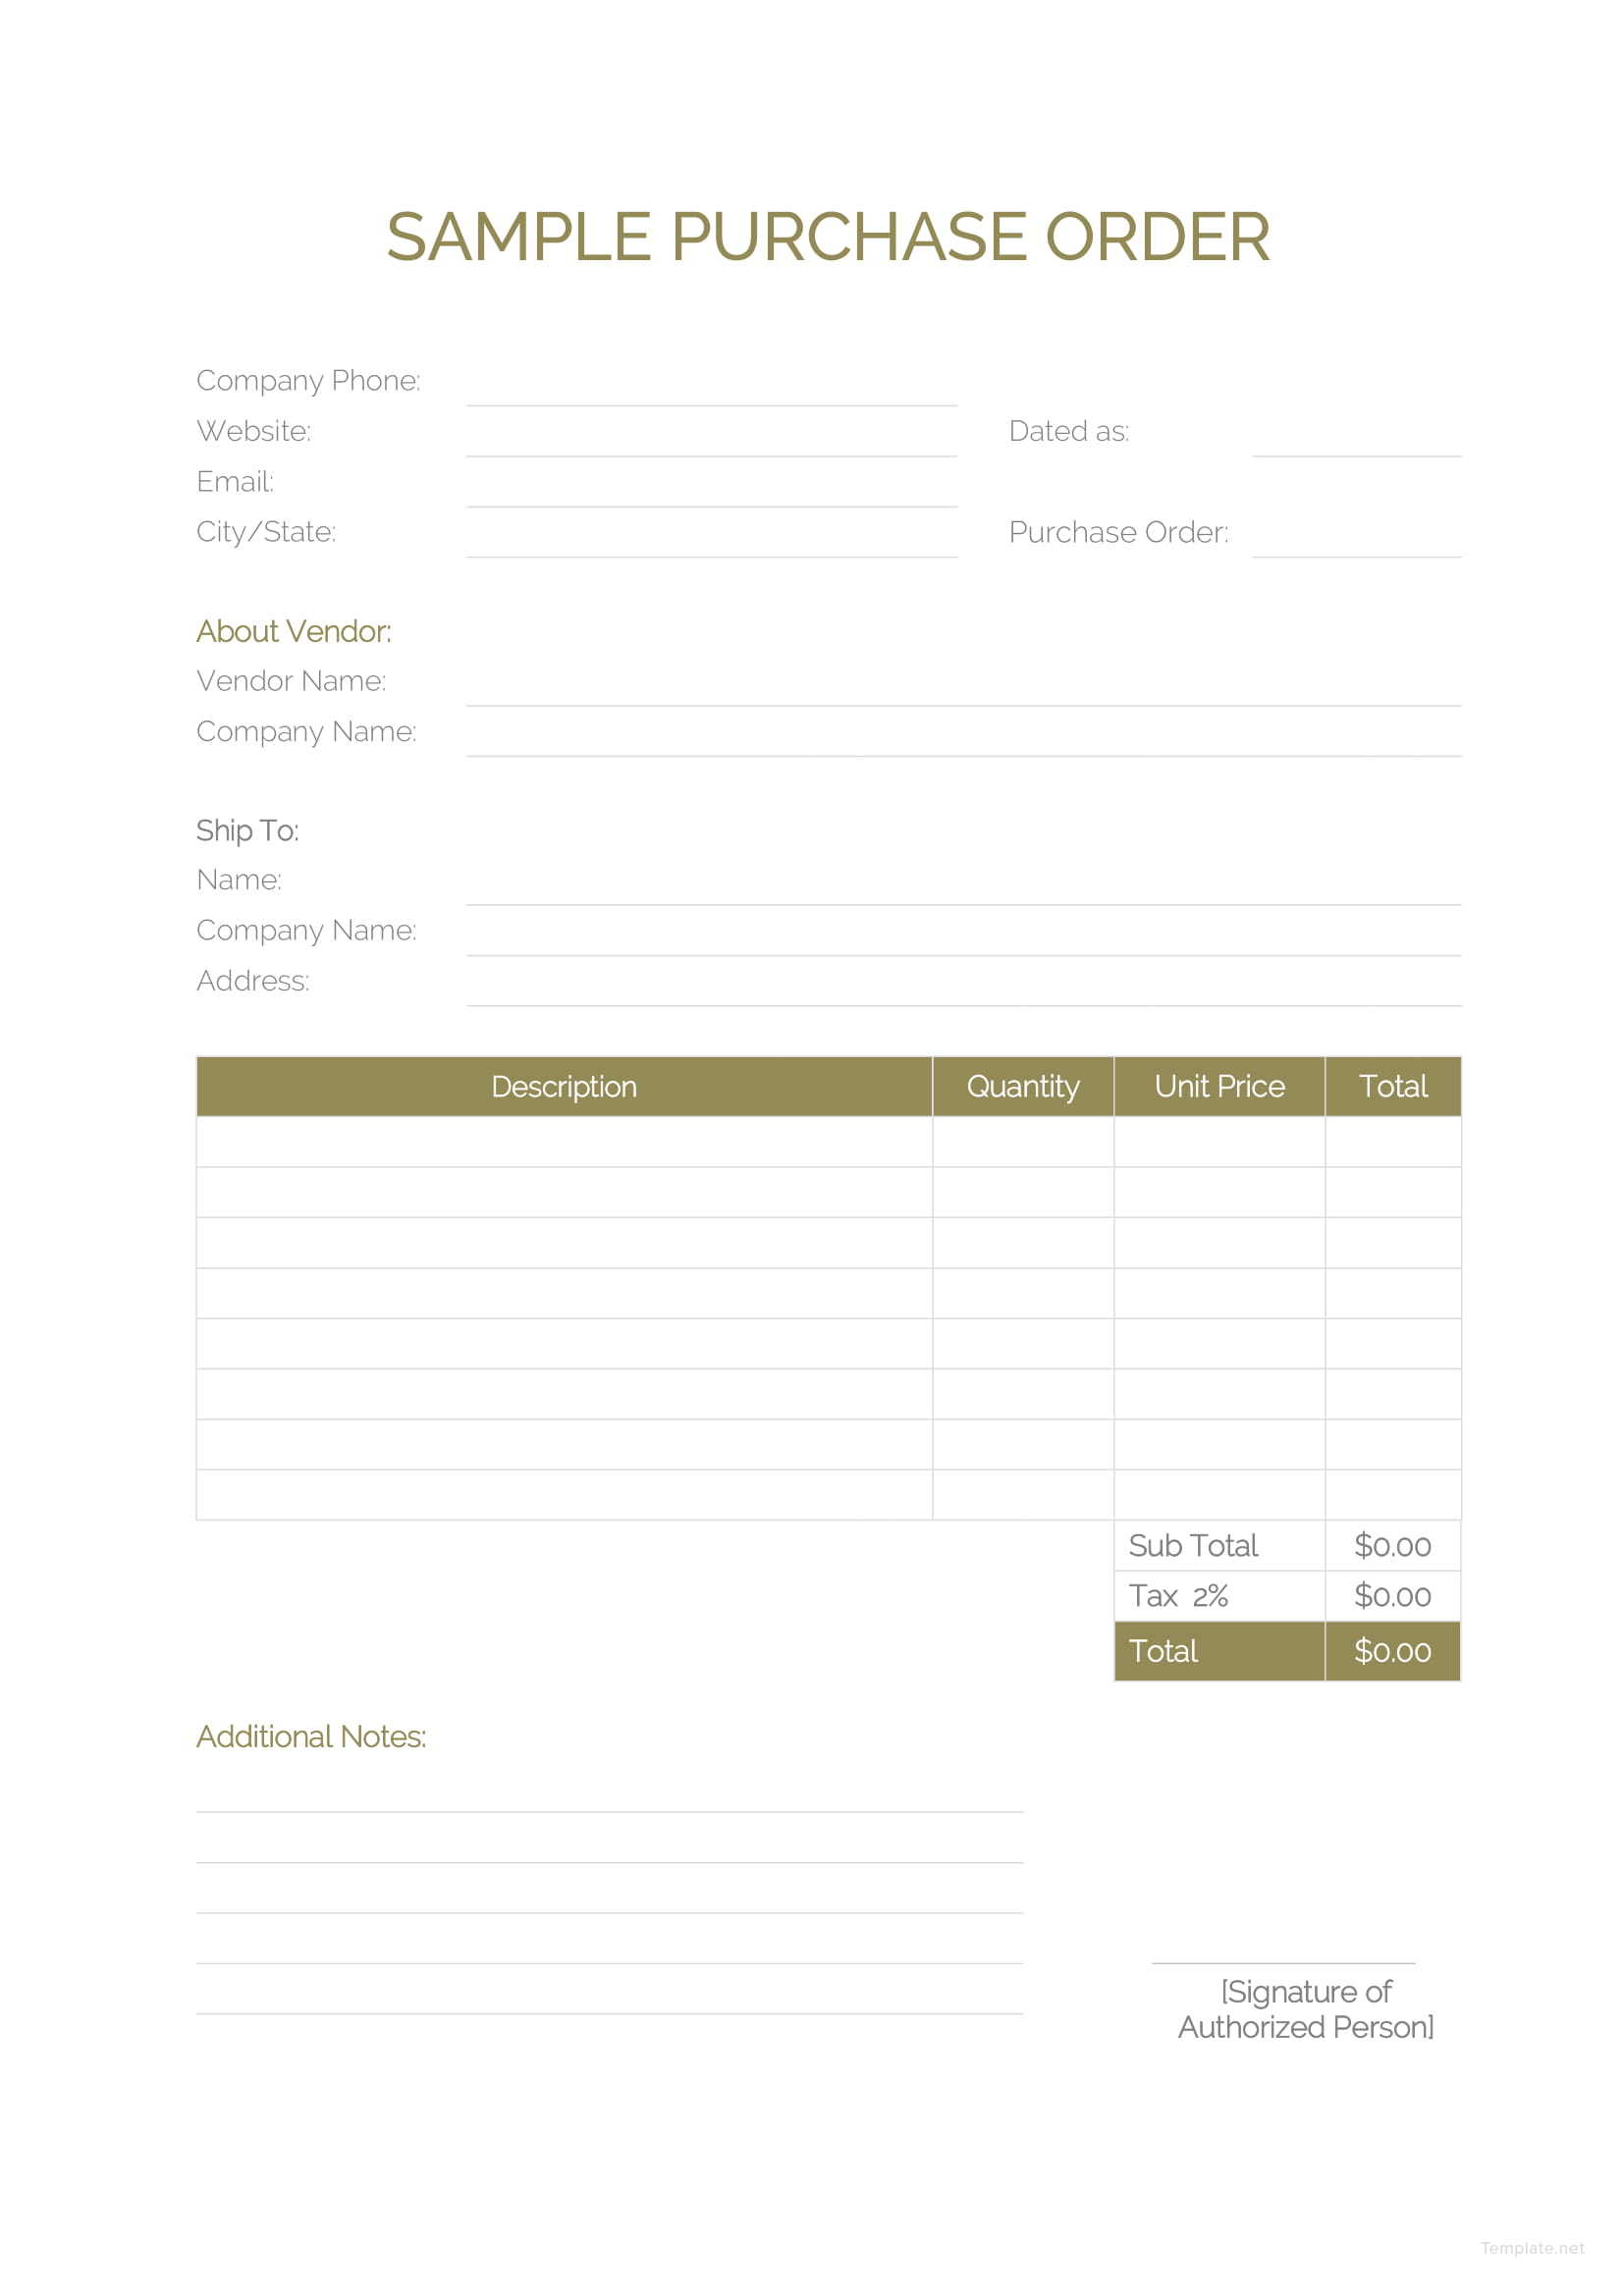 purchase-order-template-customize-for-your-business-needs